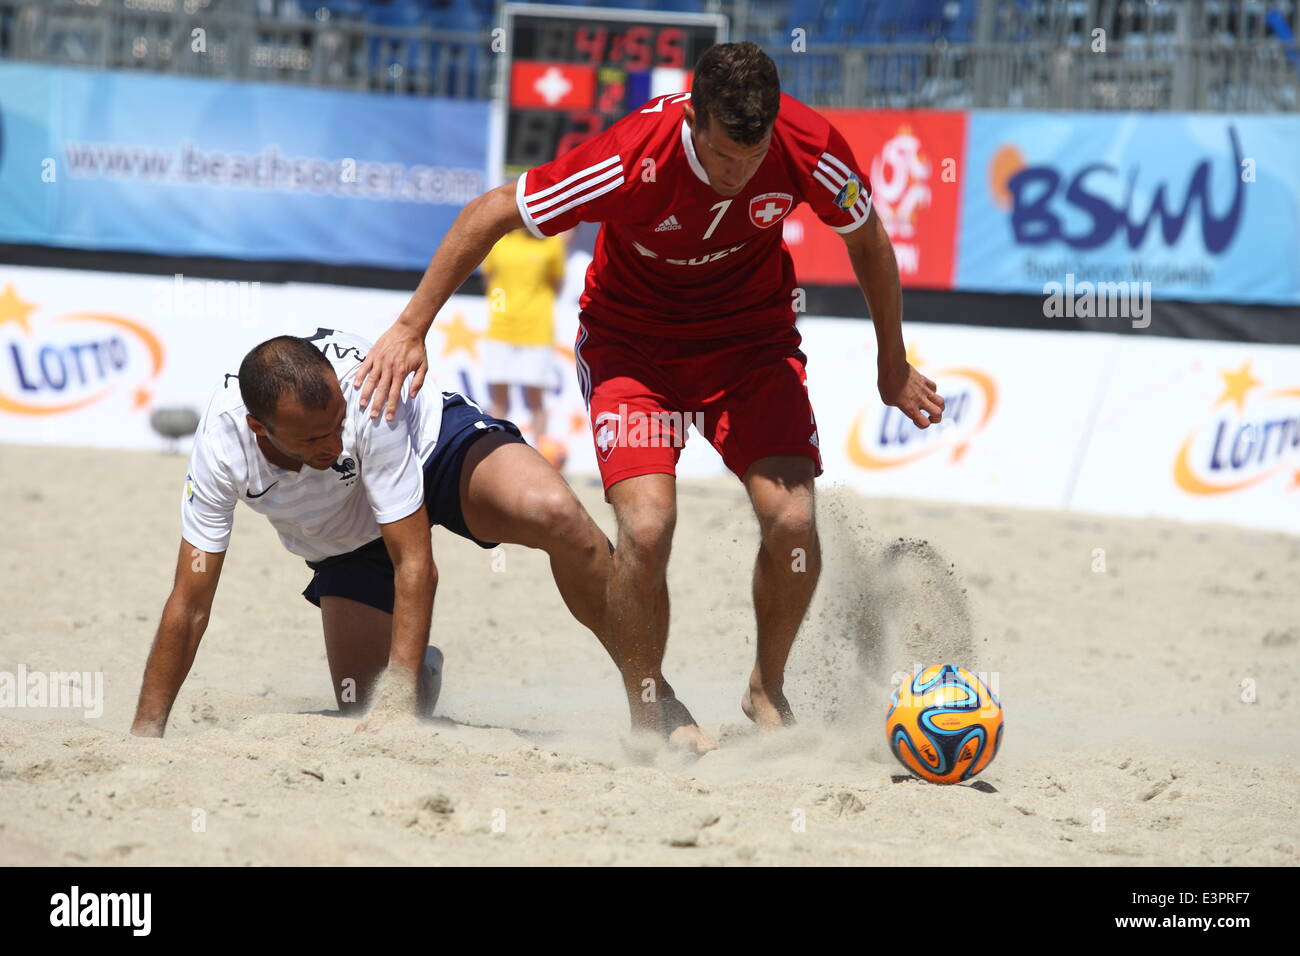 Sopot, Poland. 27th June, 2014. Euro Beach Soccer League tournament in Sopot. Game between France and Switzerland. Sandro Spaccarotella (7) in action against Didier Samoun (5) during the game. Credit:  Michal Fludra/Alamy Live News Stock Photo